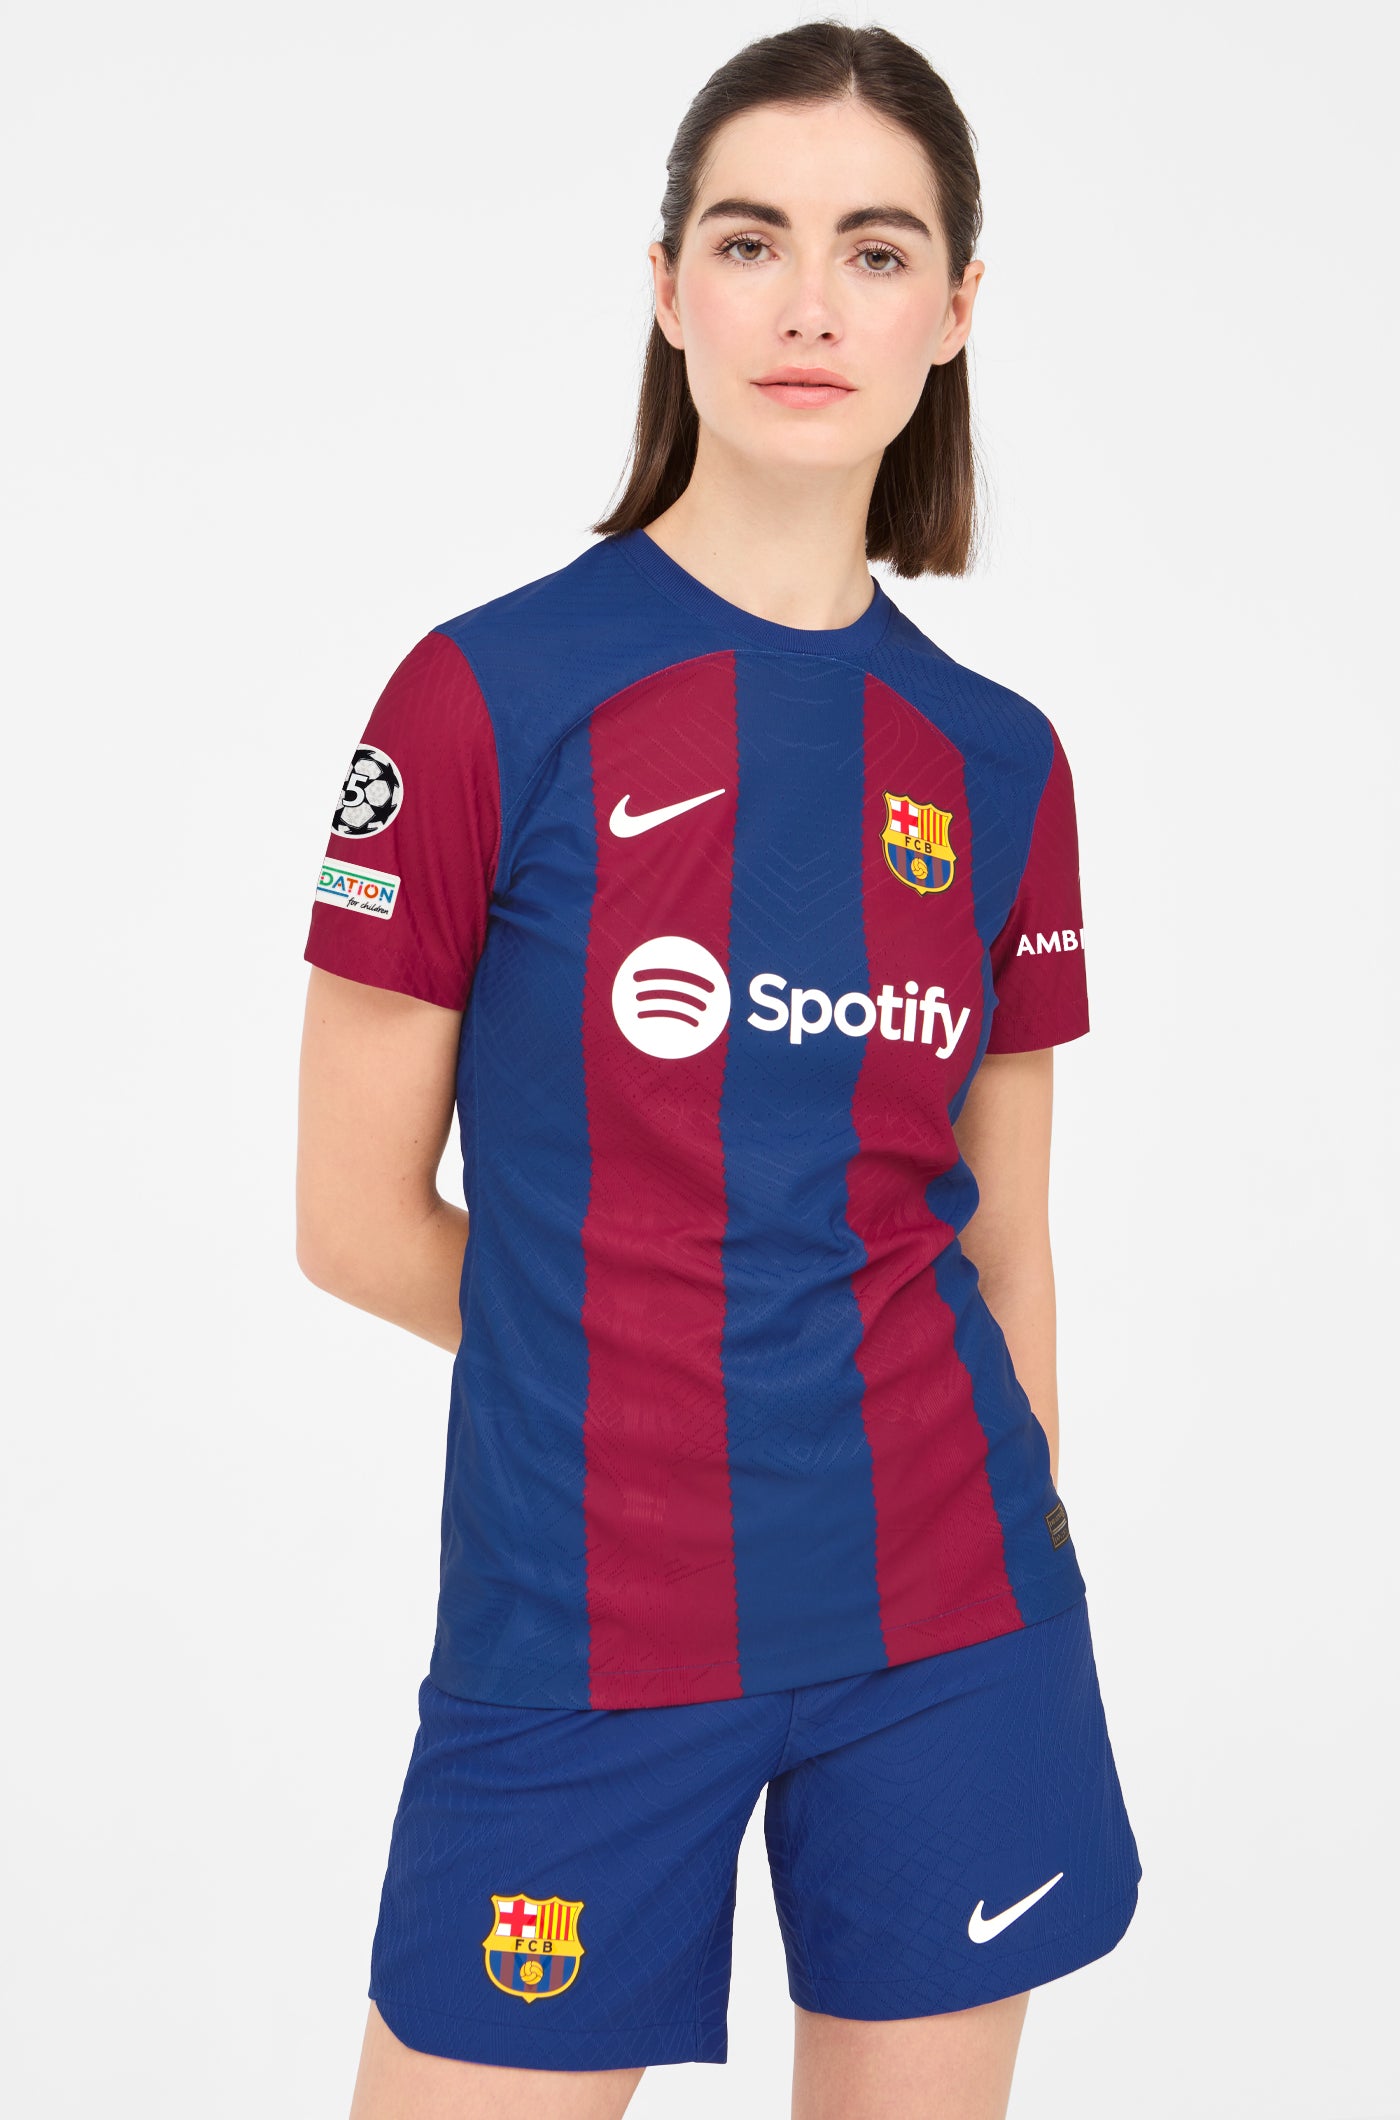 UCL FC Barcelona Home Shirt 23/24 Player's Edition - Women - MARCOS A.